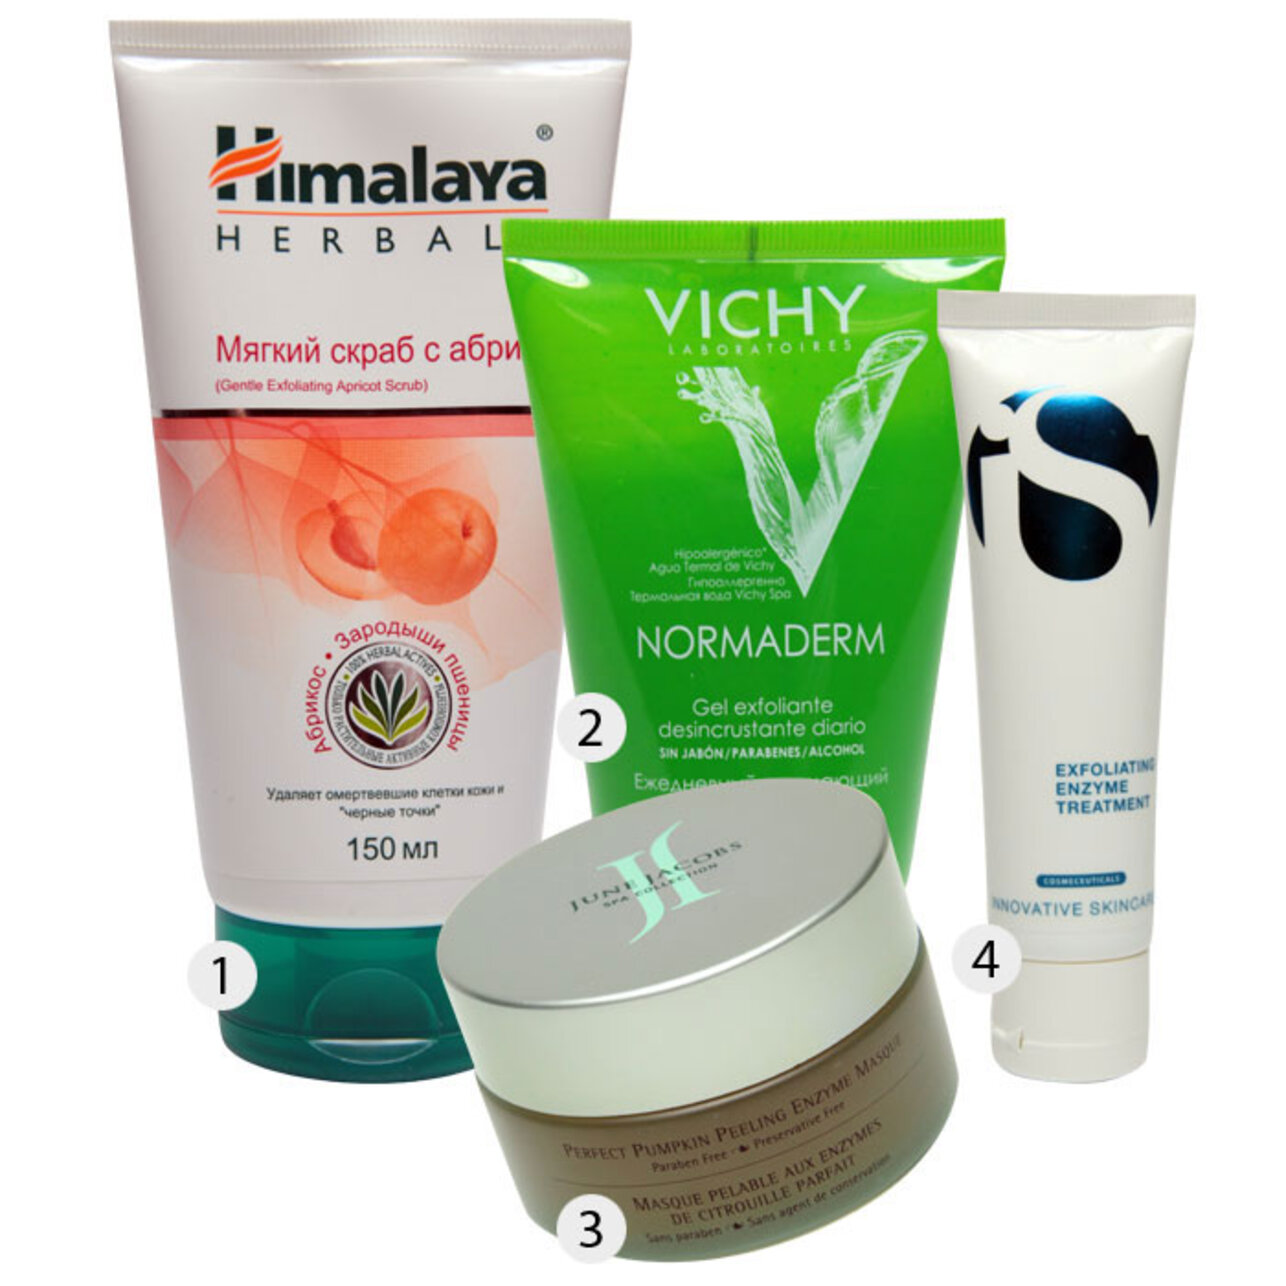 1.    Himalaya Herbals; 2.- Normaderm, Vichy; 3.  June Jacobs; 4. - Innovative of Skincare